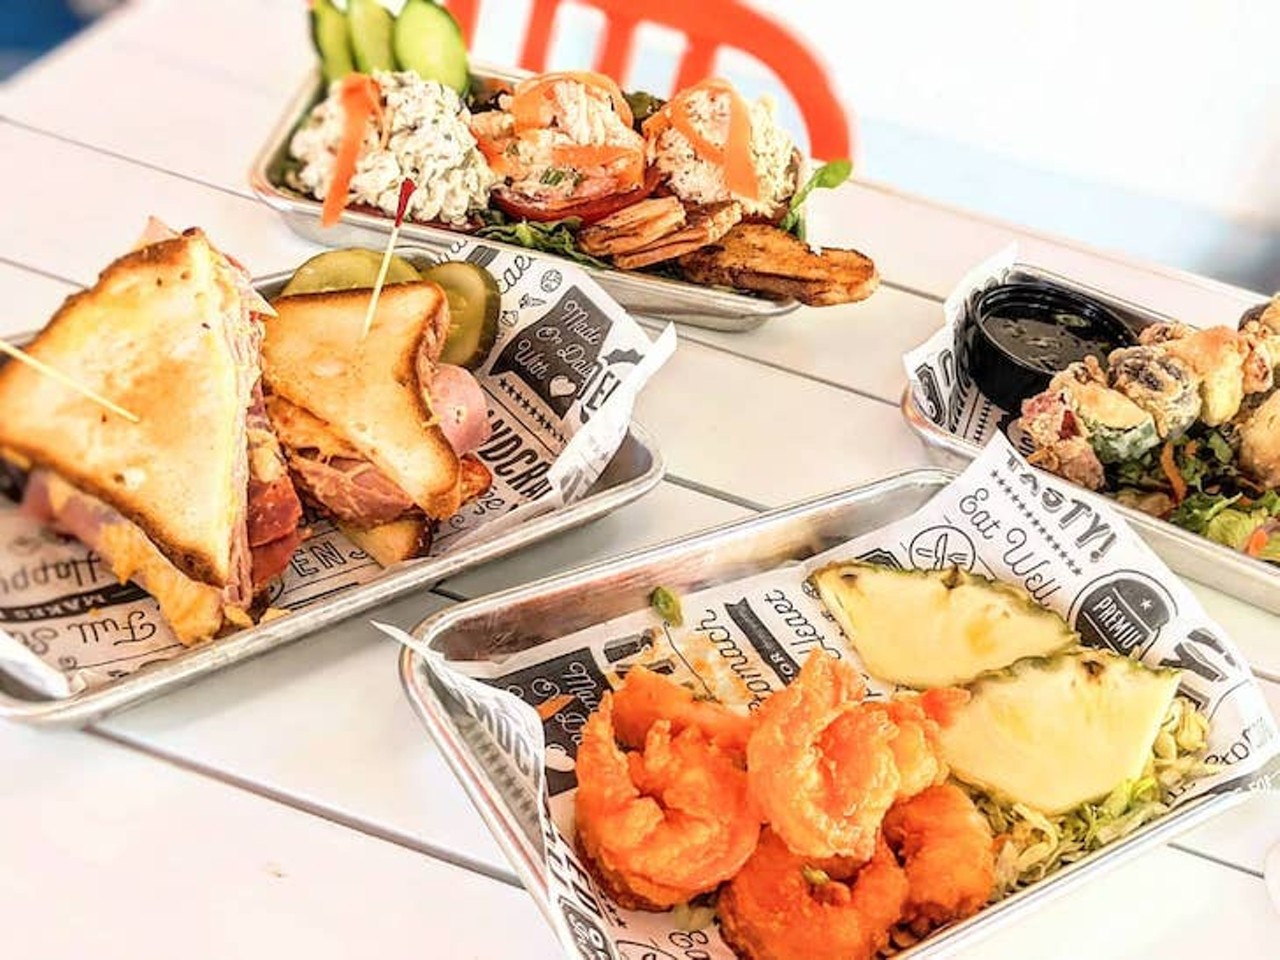 Salty&#146;s Sandwich Bar
3121 Beach Blvd. S, Gulfport,  (727) 239-7072
Salty's serves up a lineup of deli and specialty sandwiches. Diners can snag indoor seating to escape the heat, or opt for outdoor dining on the front patio or side courtyard which are both pet friendly.